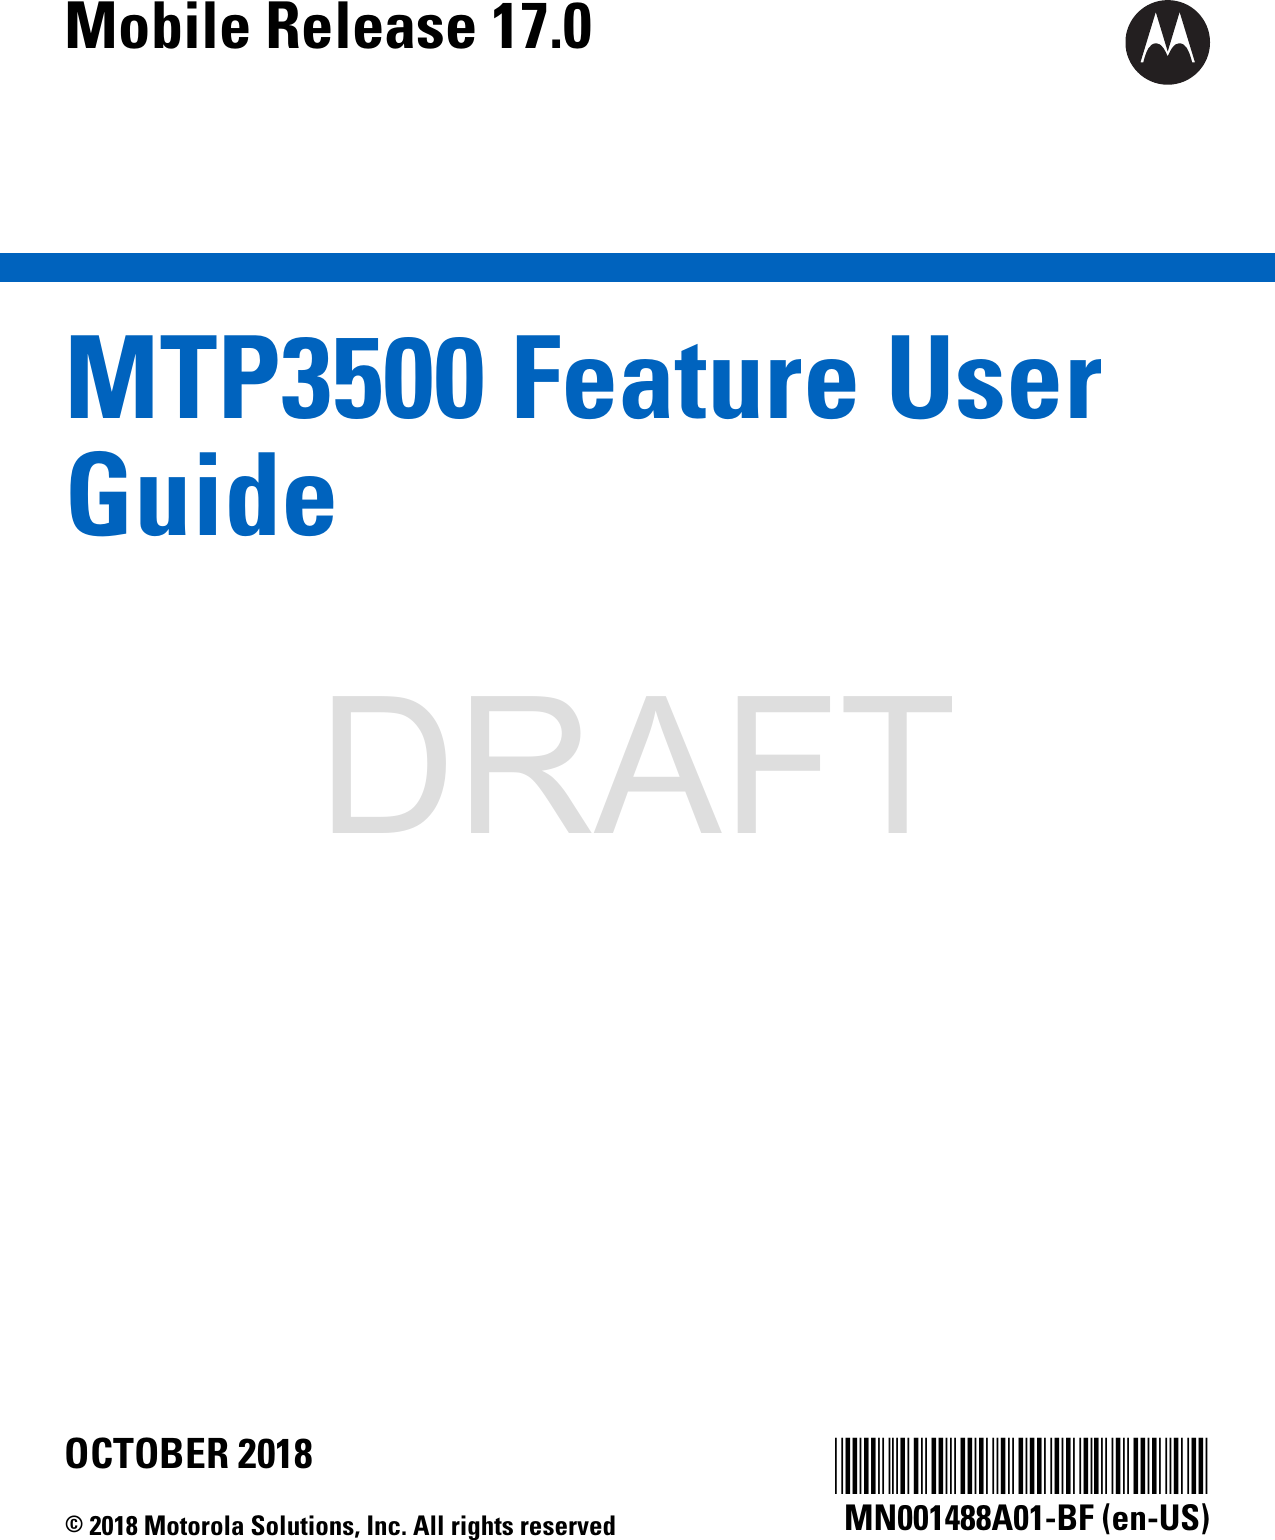 MTP3500 Feature UserGuideMobile Release 17.0*MN001488A01*MN001488A01-BF (en-US)OCTOBER 2018© 2018 Motorola Solutions, Inc. All rights reservedDRAFT